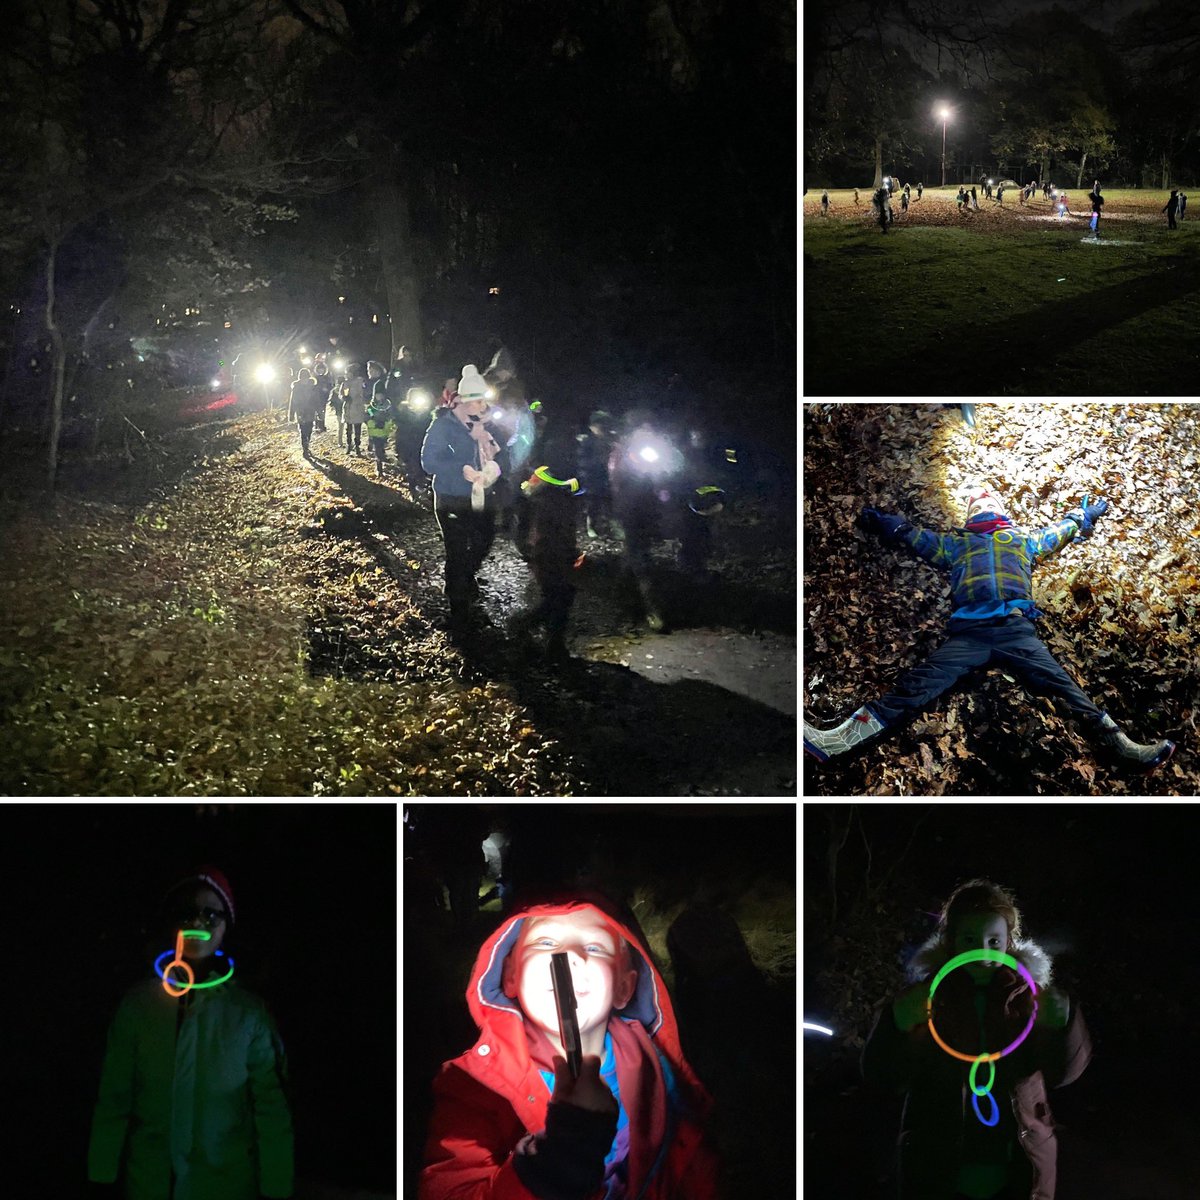 This evening was our joint #Beaver & #Cub #Glowstick walk!
We used our glowsticks and torches to light our way from @ManorfieldHall into #MiddletonPark for a wide game and then back for #hotchocolate & #biscuits!
#SkillsForLife @Child_Leeds @CYScouts @slamscouts @SouthLeedsLife